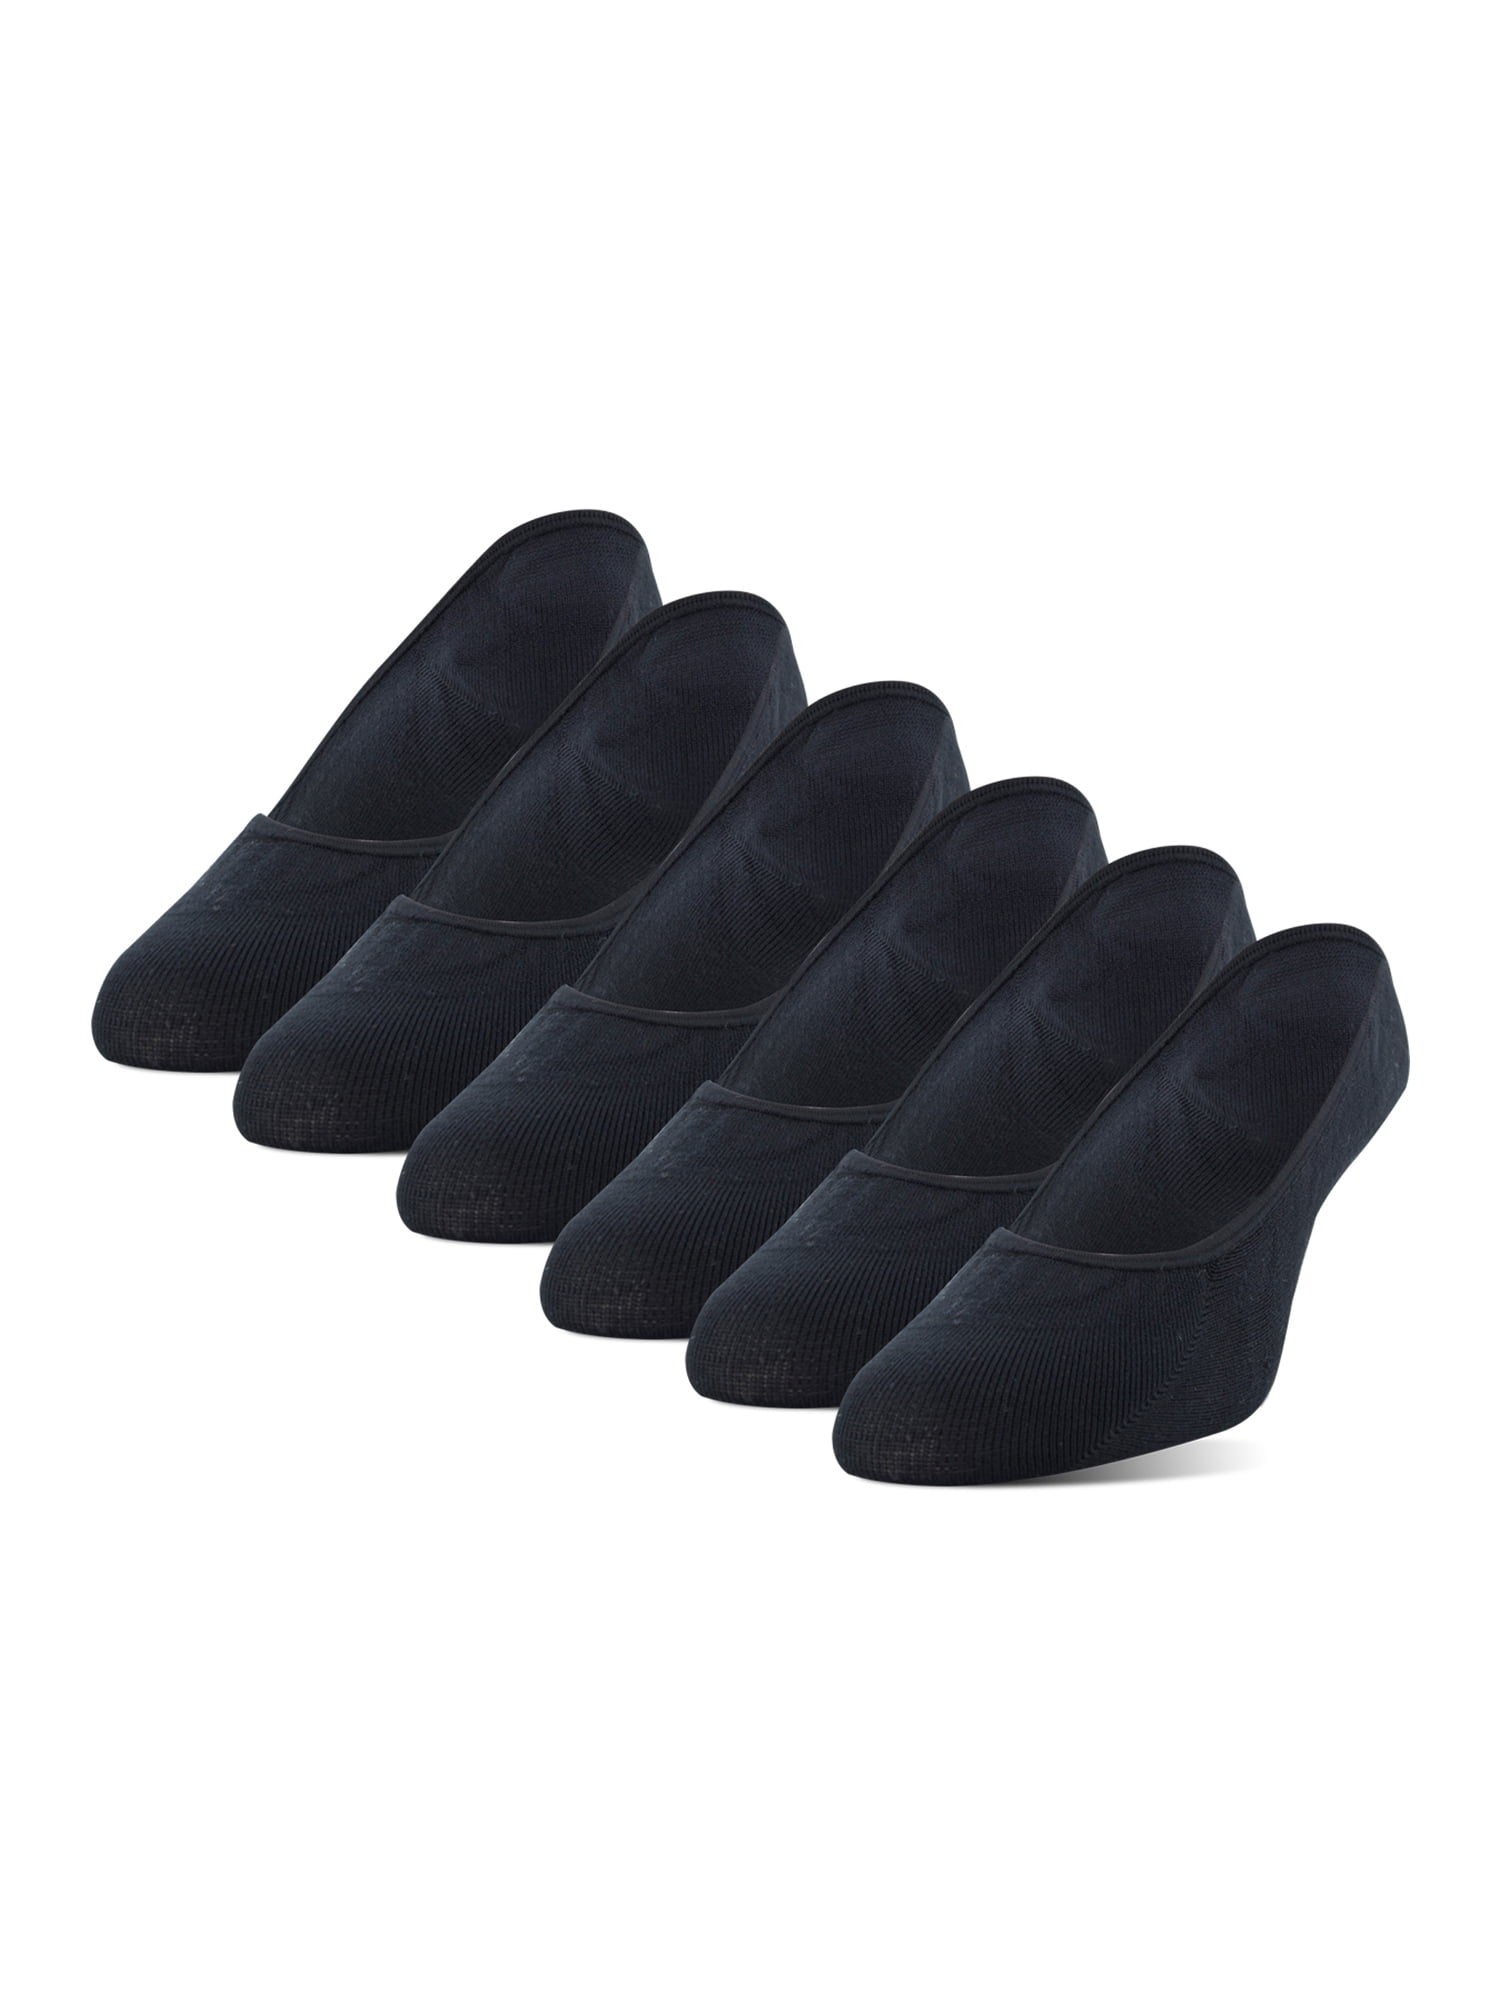 PEDS Womens Cushion Ball Of Foot Liner 6 Pairs